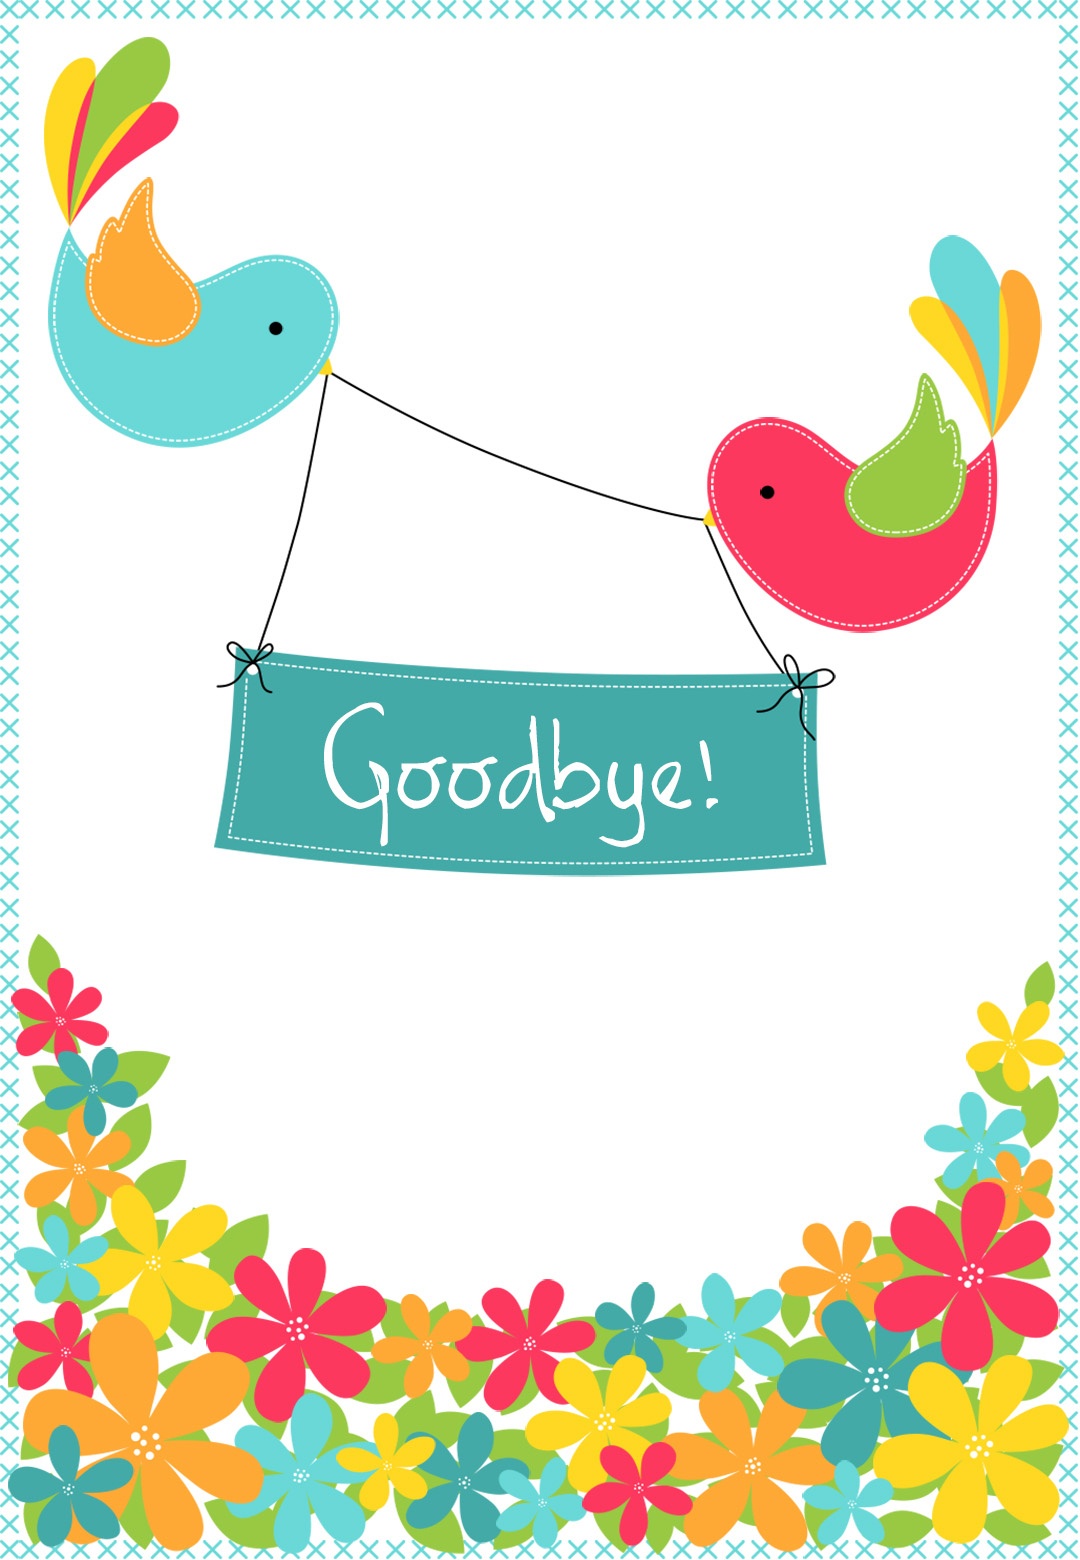 Goodbye From Your Colleagues - Good Luck Card (Free) | Greetings Island - Free Printable We Will Miss You Greeting Cards